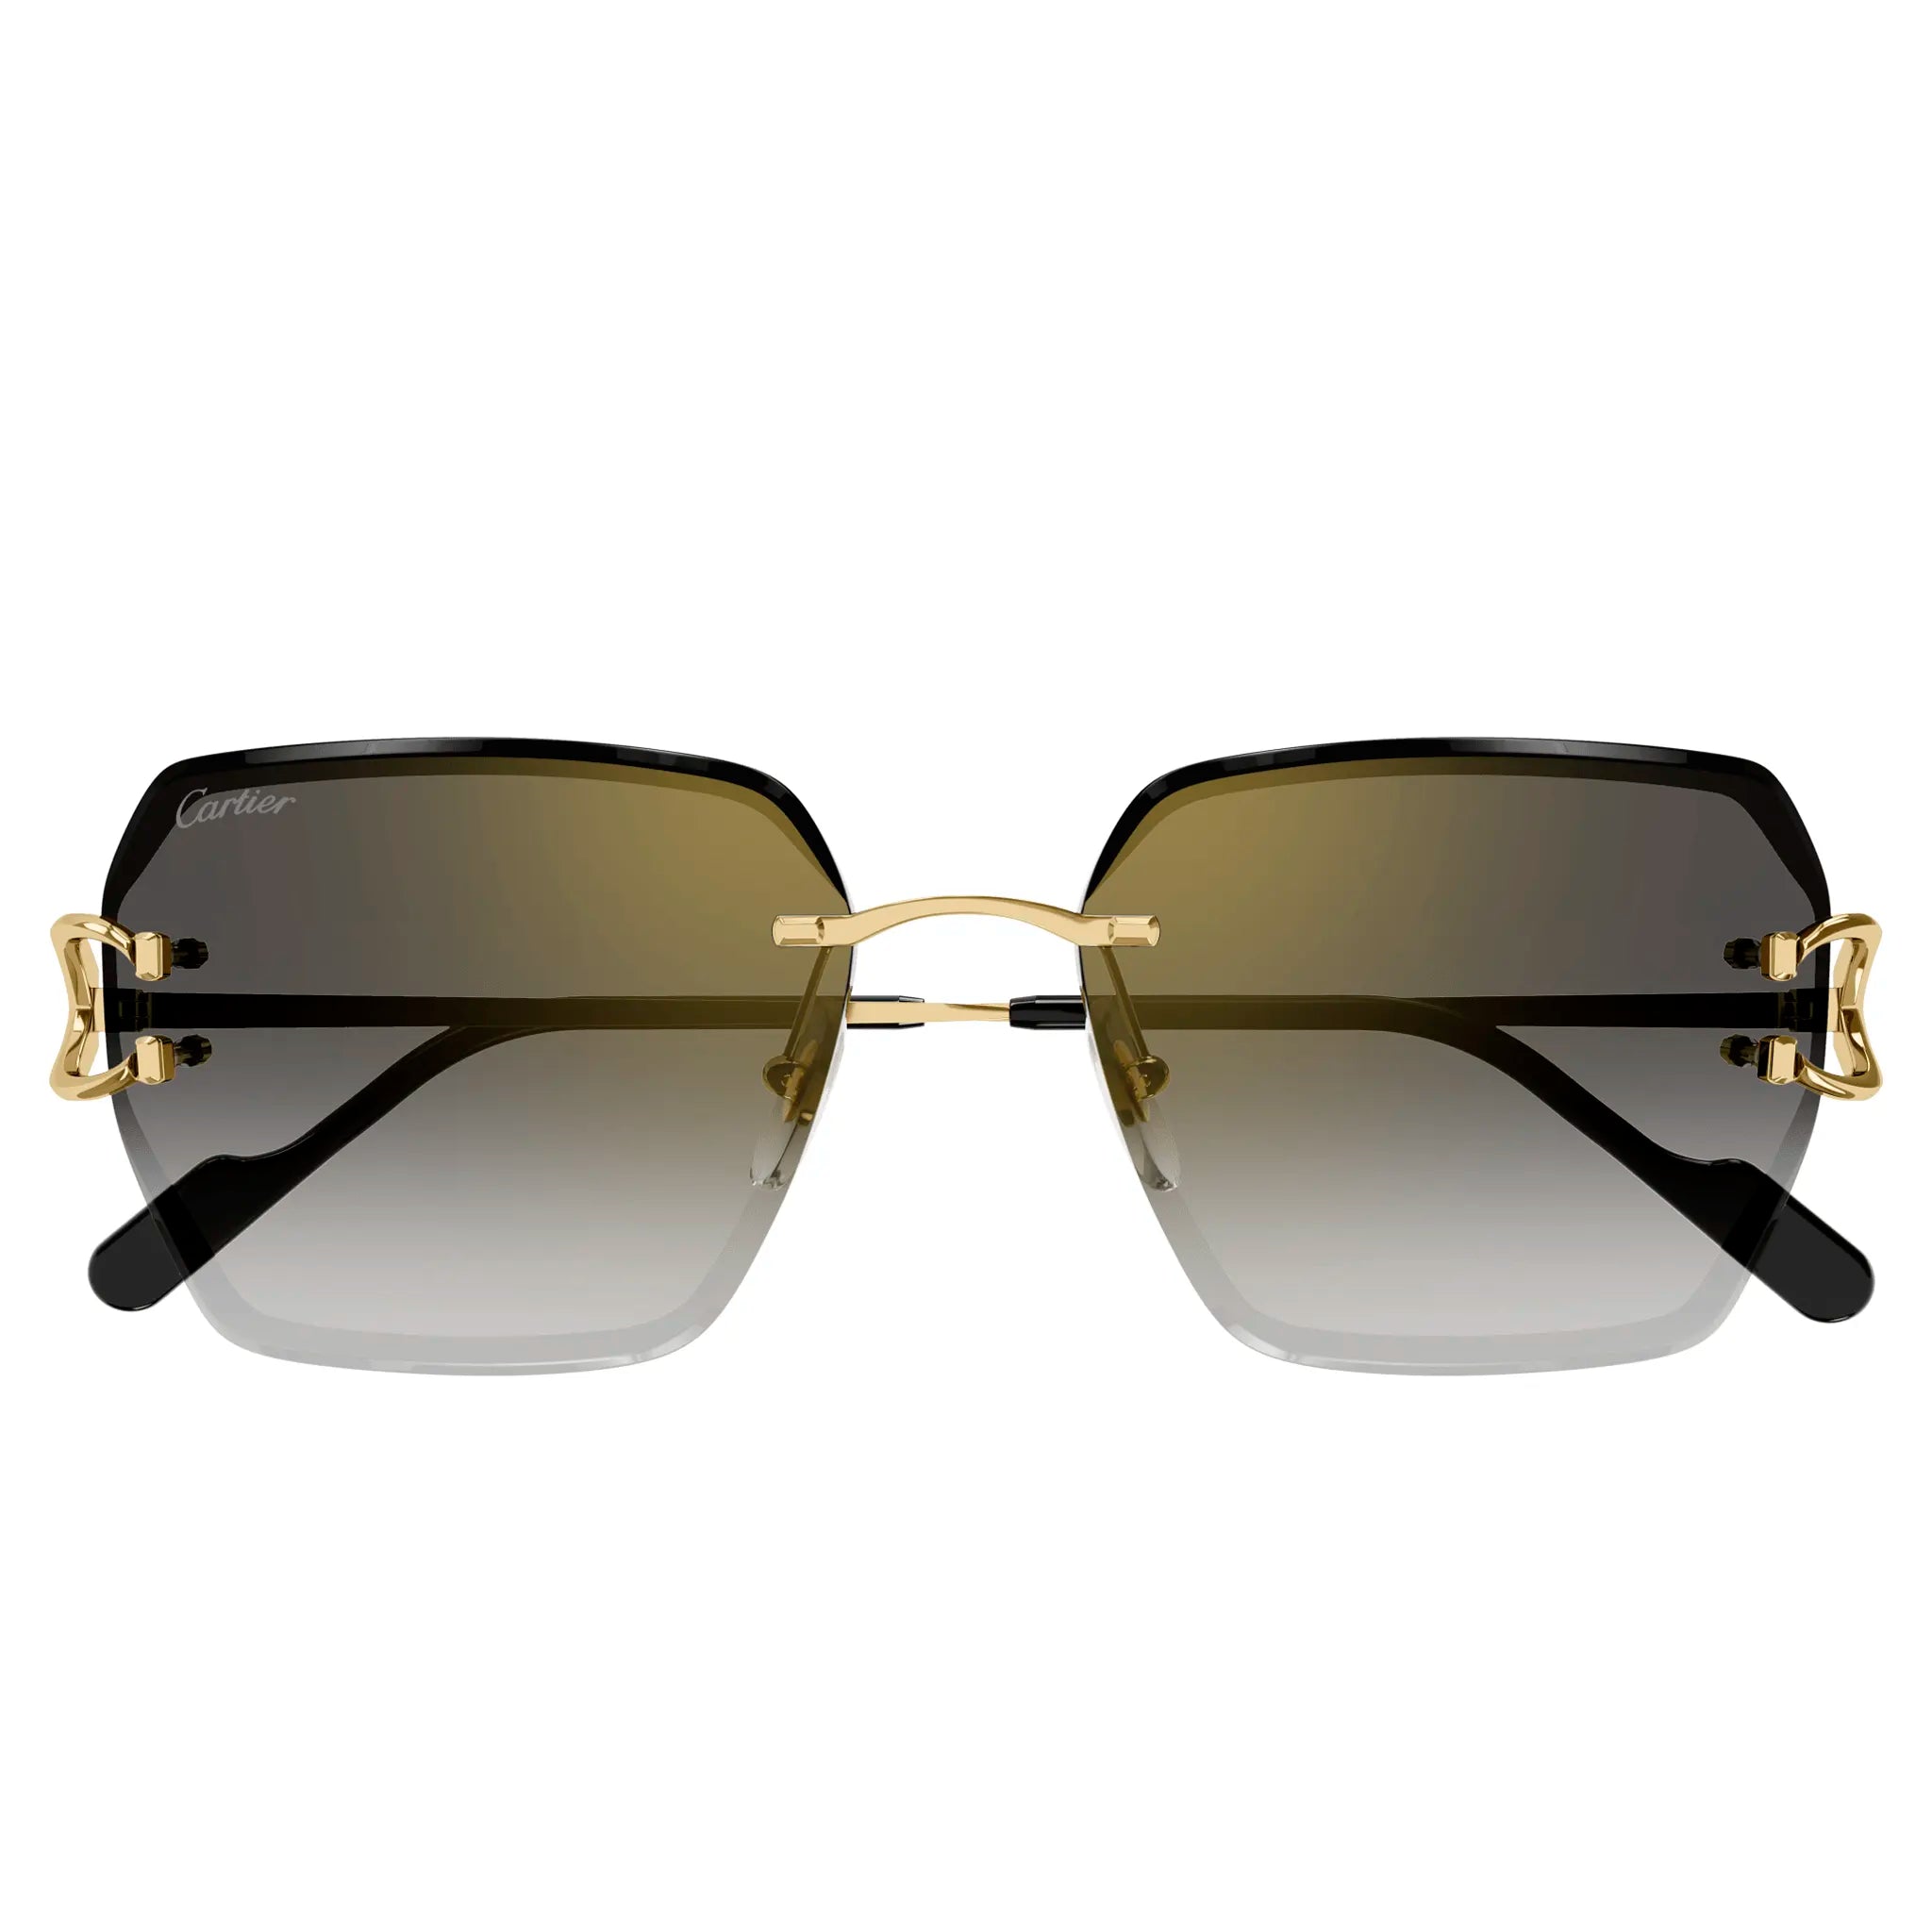 Folded view of Cartier Eyewear CT0466S-001 Gold Grey Sunglasses